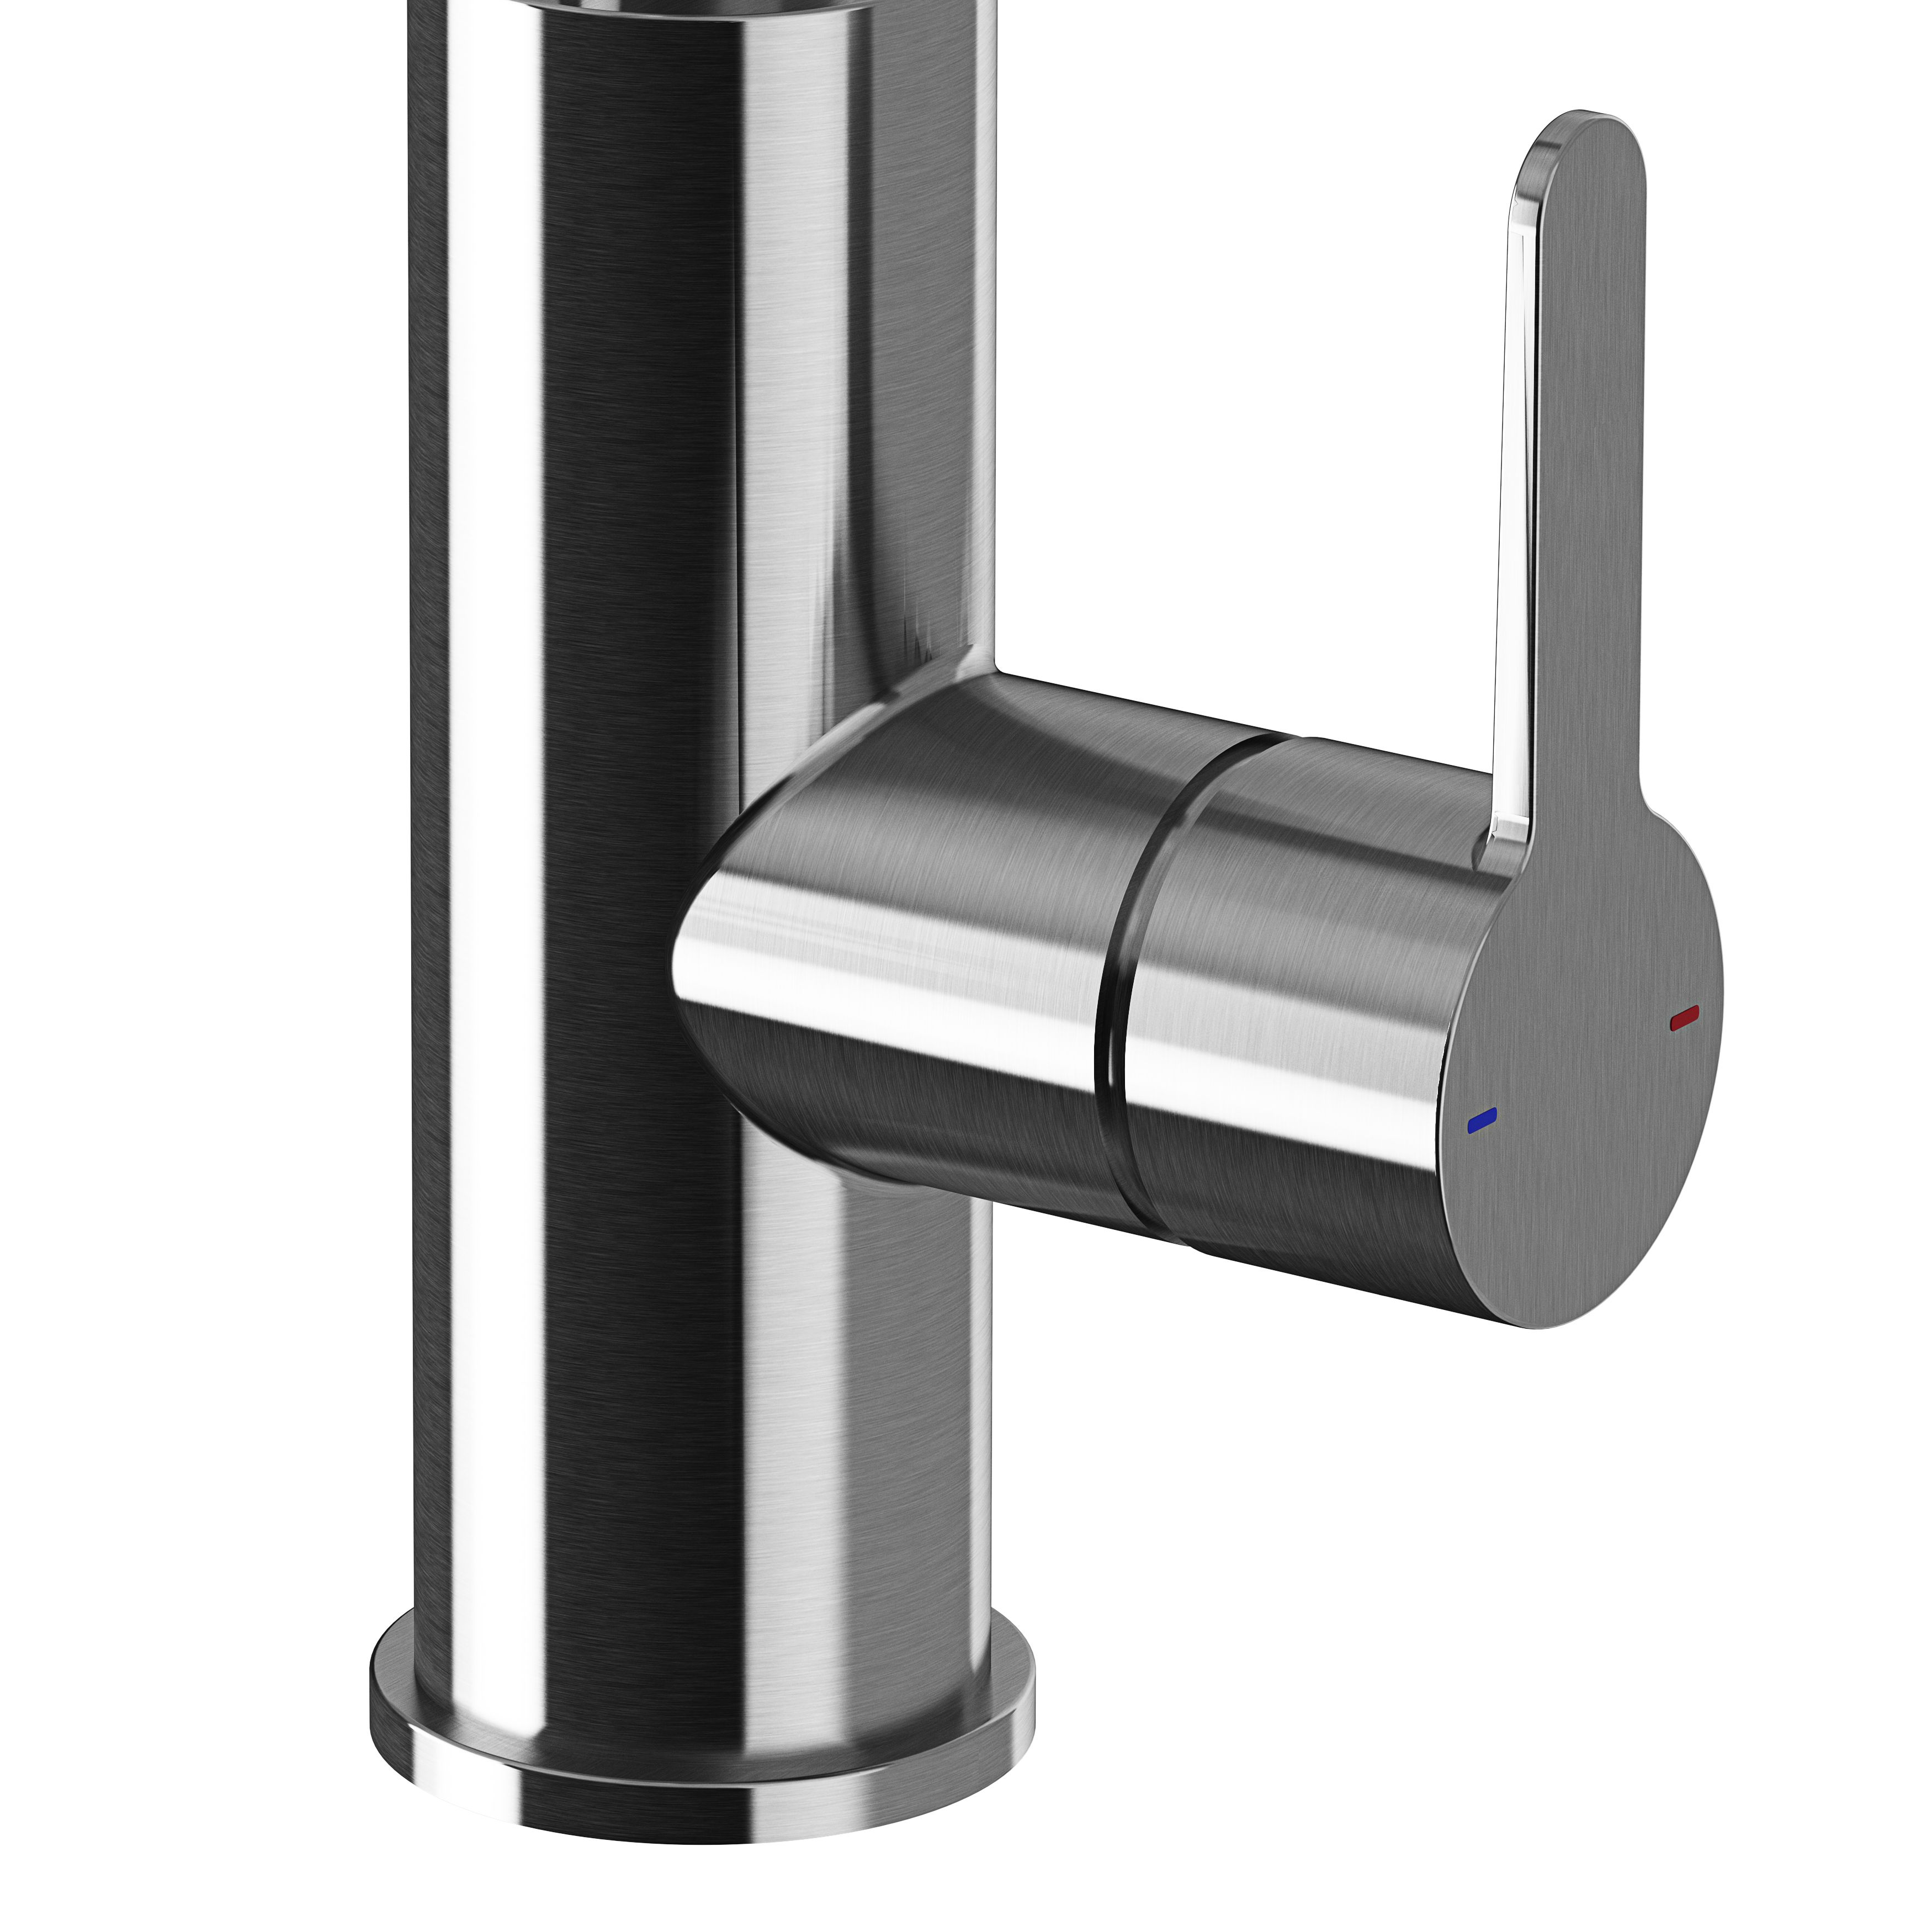 GoodHome Zanthe Stainless steel effect Kitchen Side lever Tap